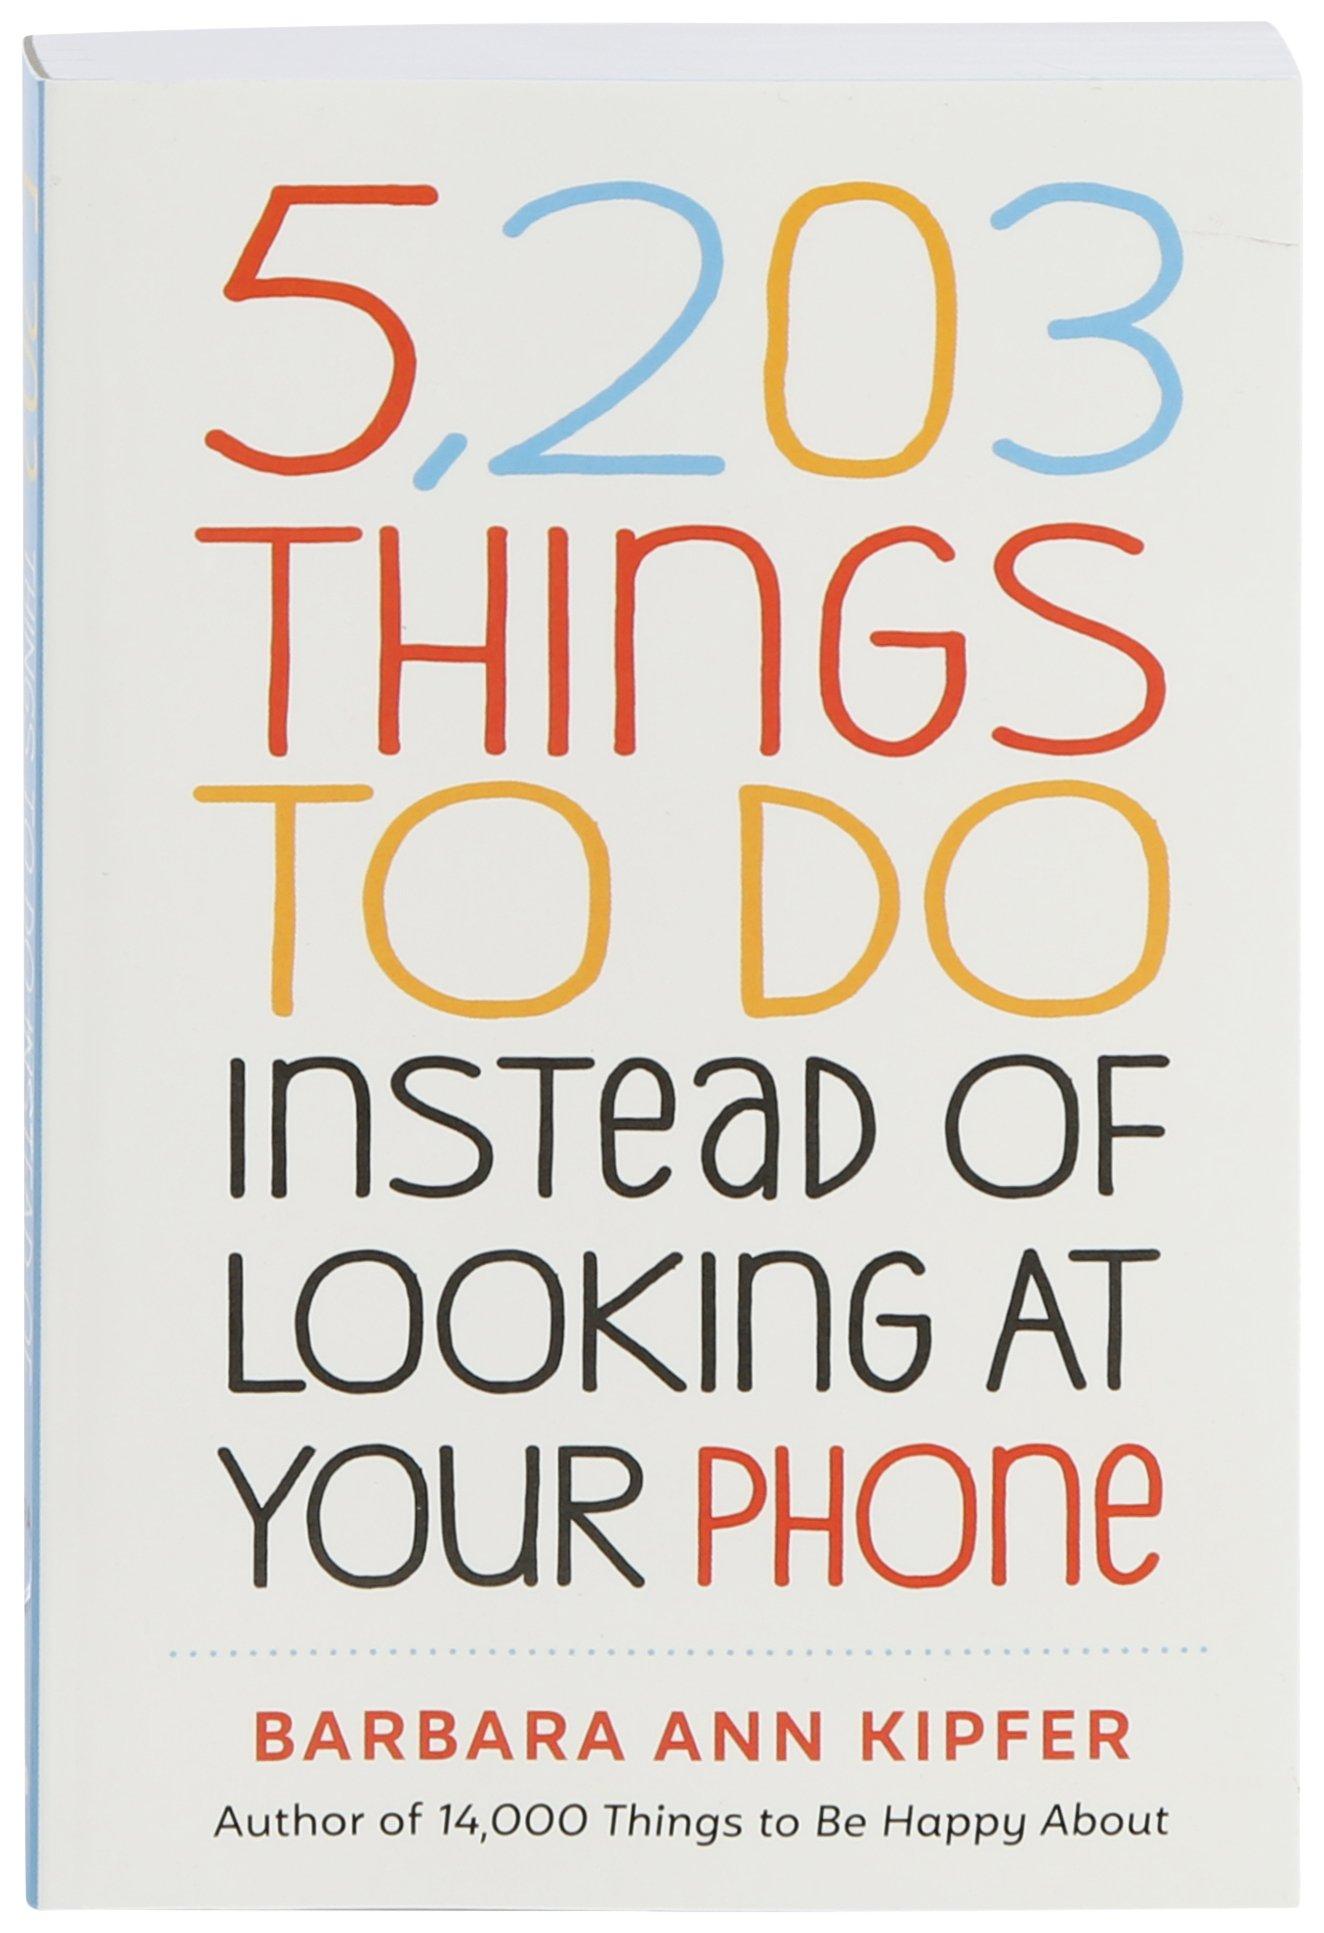 5,203 Things To Do Instead Of Look At Phone Book